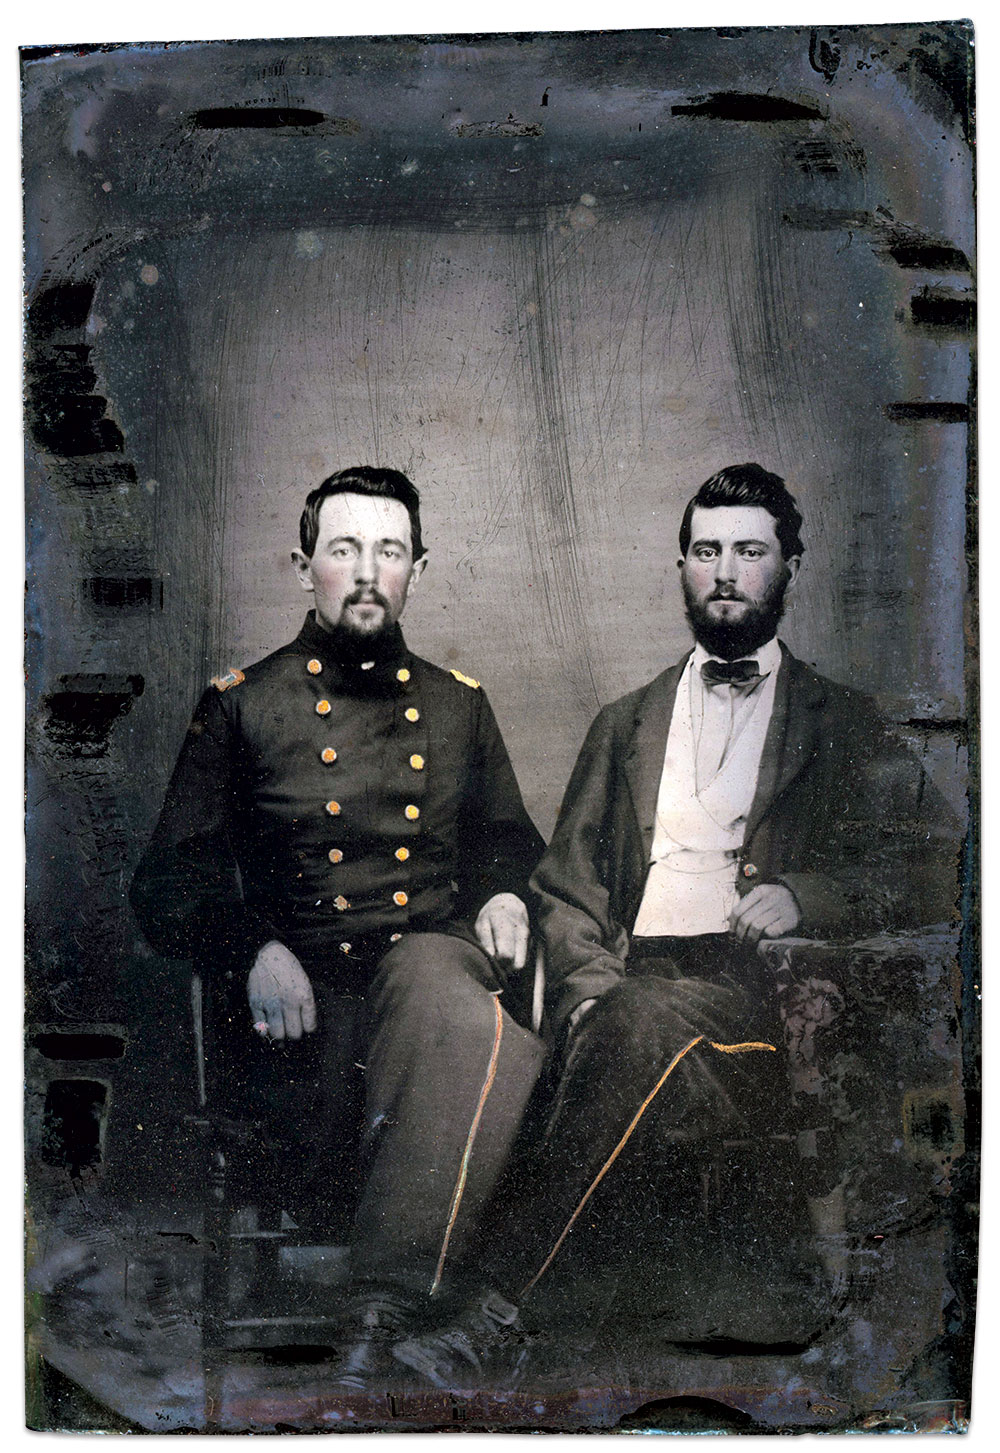 He fired one of the shots that brought down Washington: John J. Weiler, left, commanded the detachment of Company E, 17th Indiana Infantry, that discovered Washington and Rooney Lee reconnoitering near Elkwater. Weiler is pictured as major, a promotion he received in November 1864. The soldier seated next to him is unidentified. Quarter-plate ambrotype by an unidentified photographer. Rick Brown Collection of American Photography.